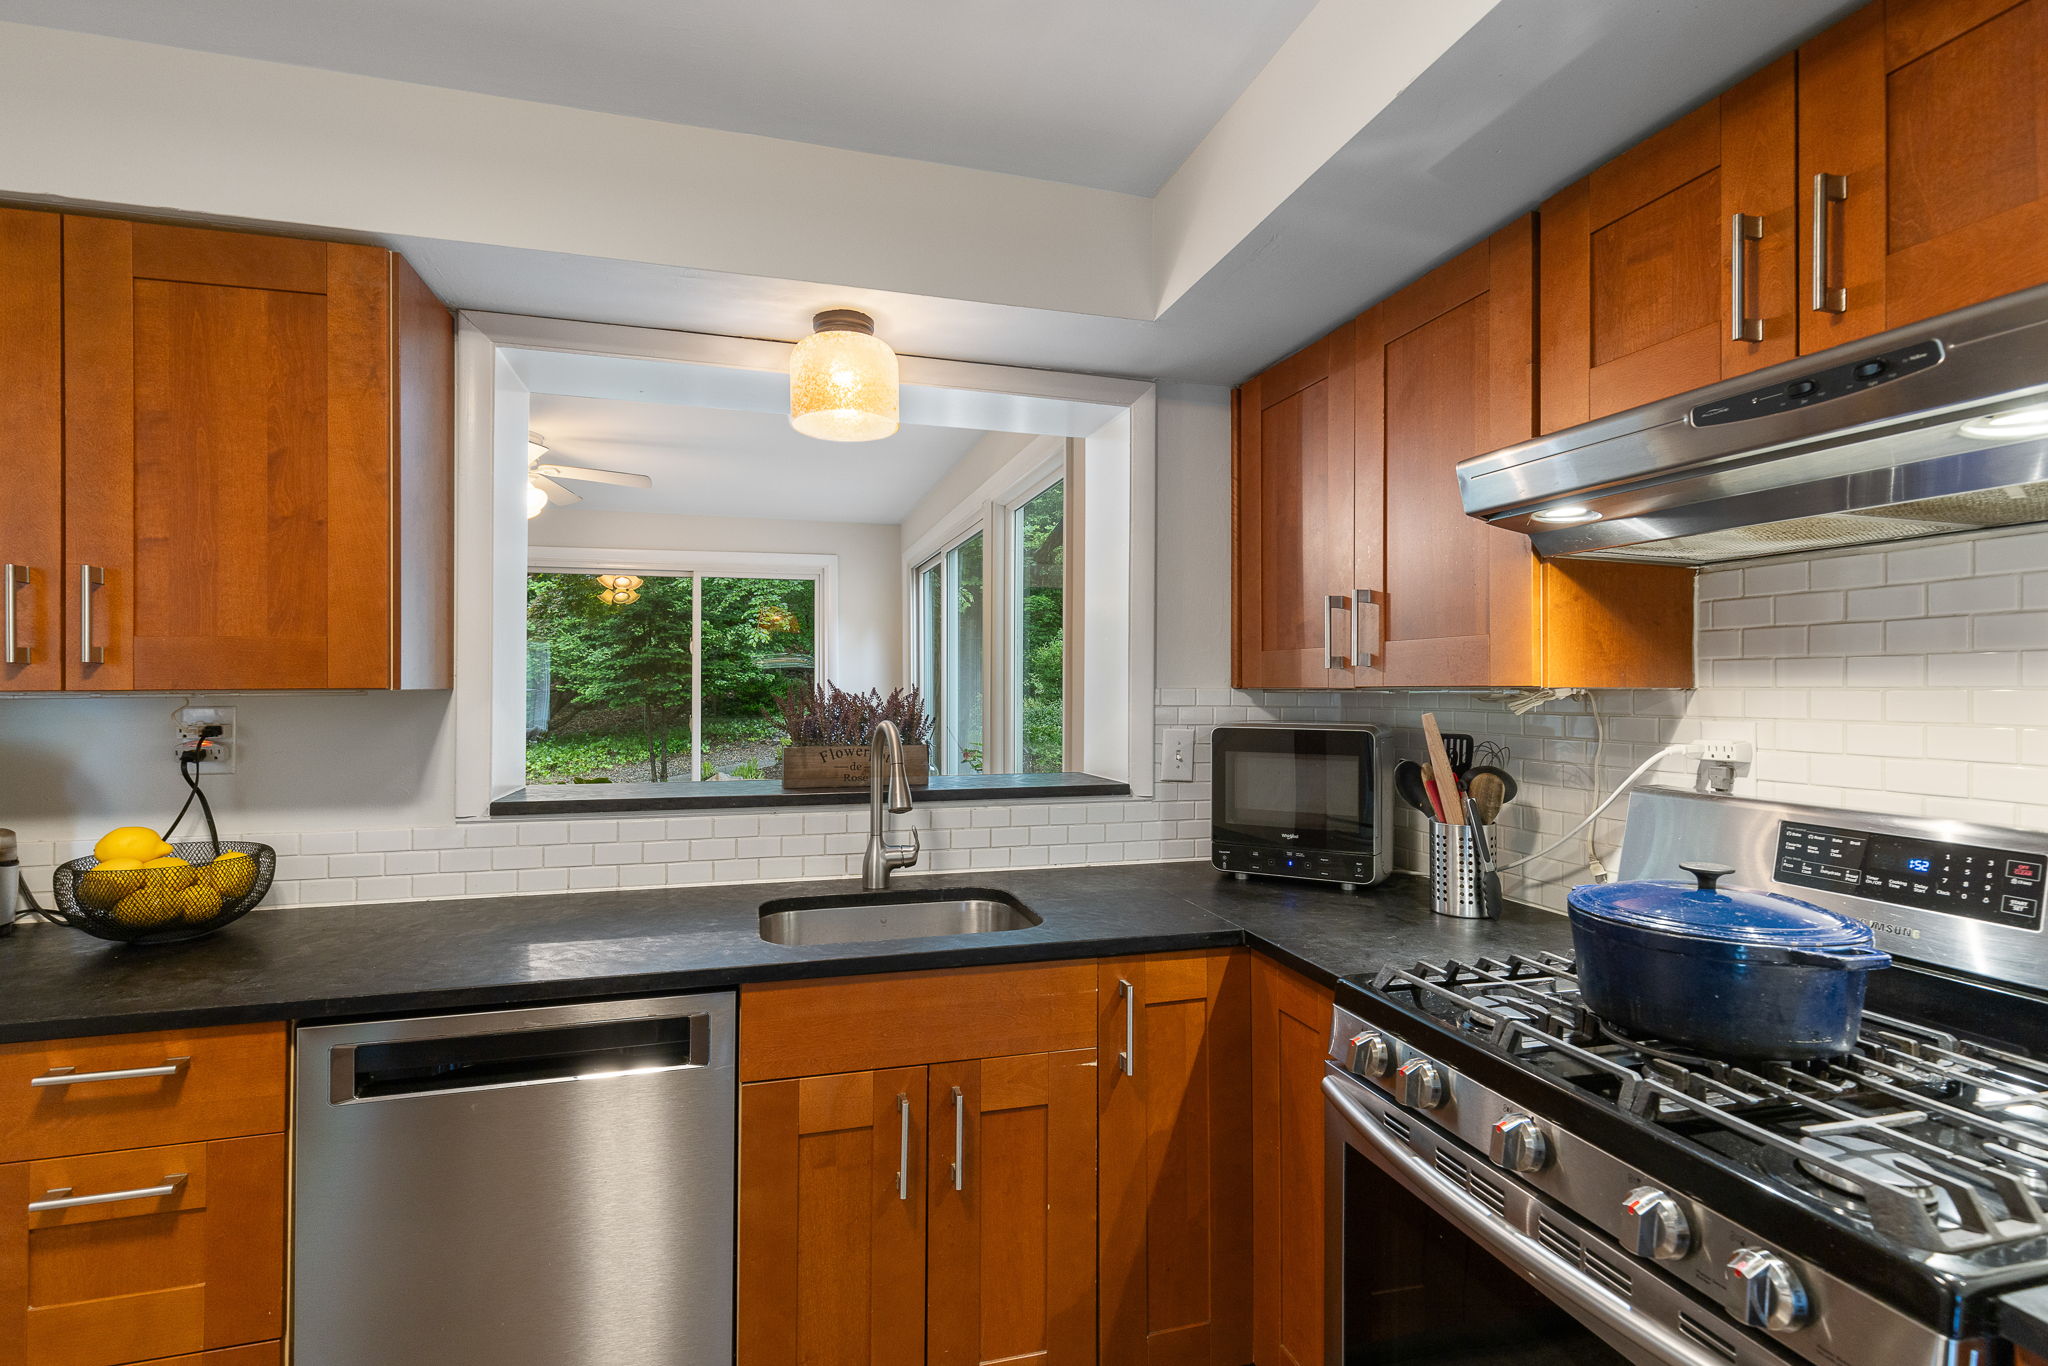 Updated kitchen w stainless steel appls & granite counters